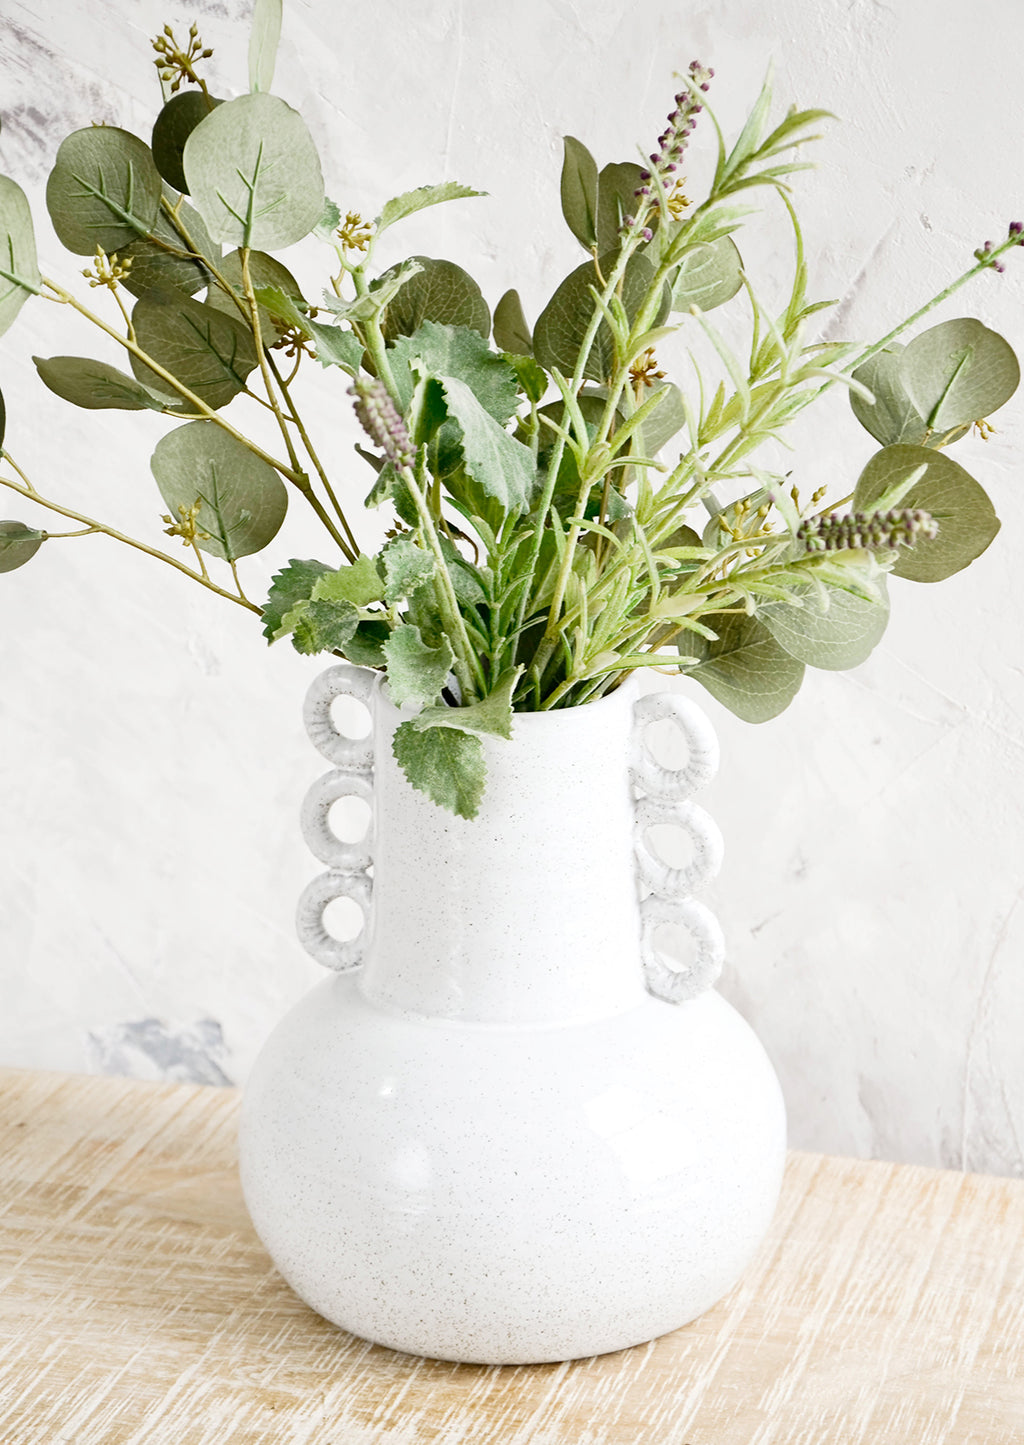 2: Large sculptural white ceramic vase on a rustic table with a mix of herbs & eucalyptus 